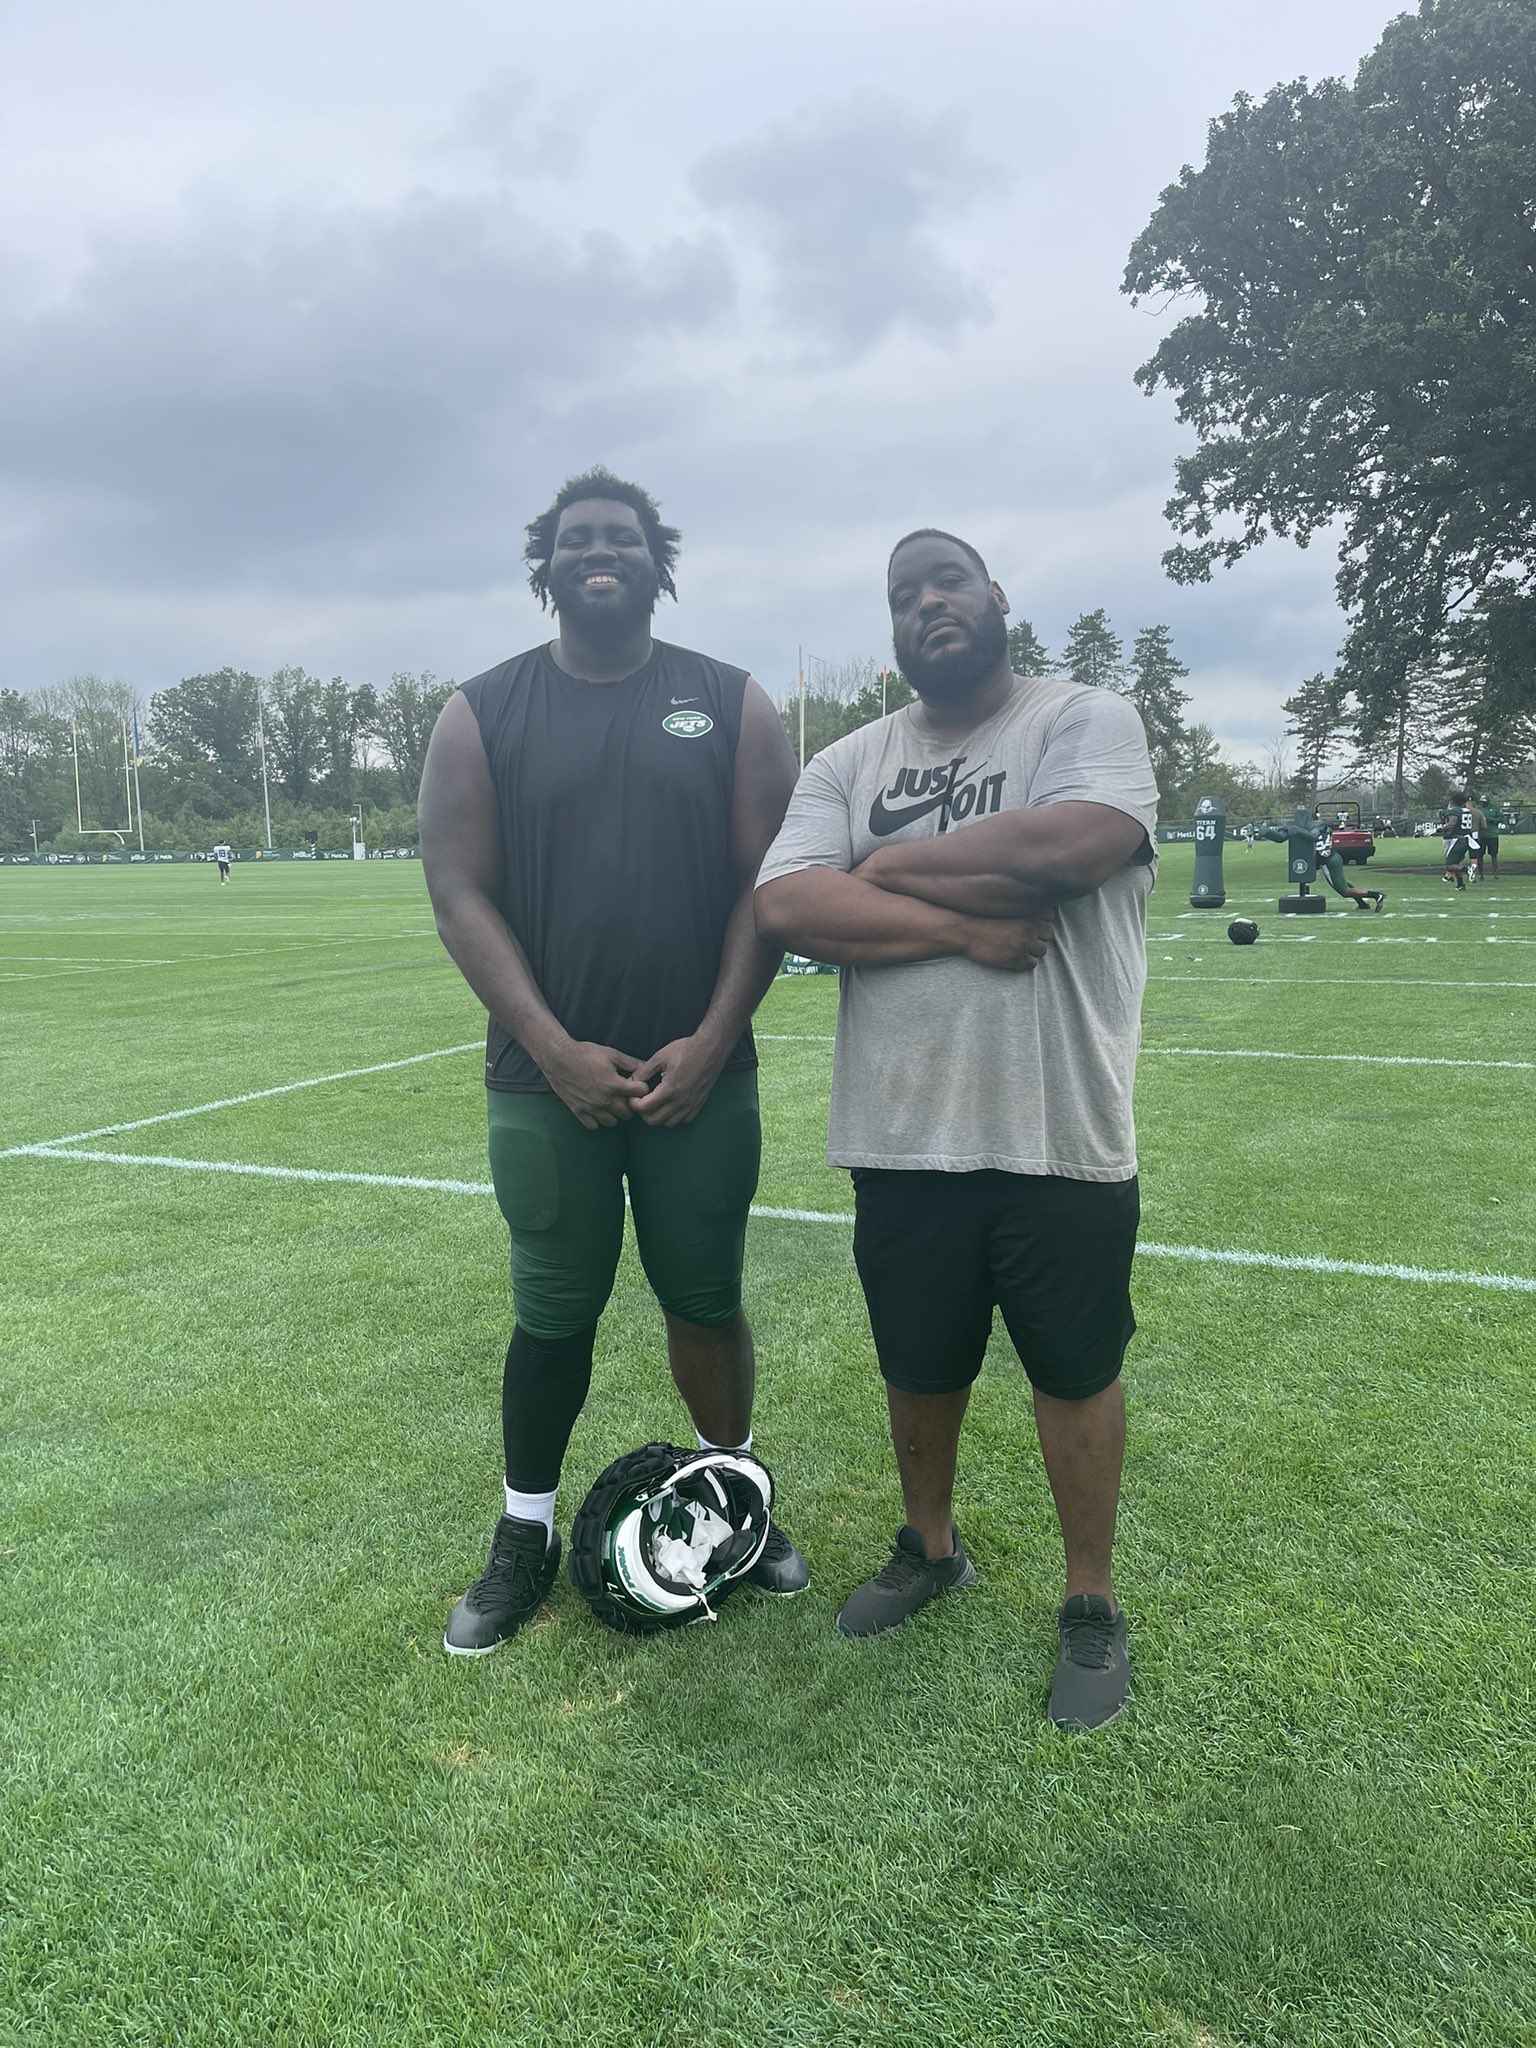 Damien Woody on X: 'Dropped by @nyjets training camp to see these